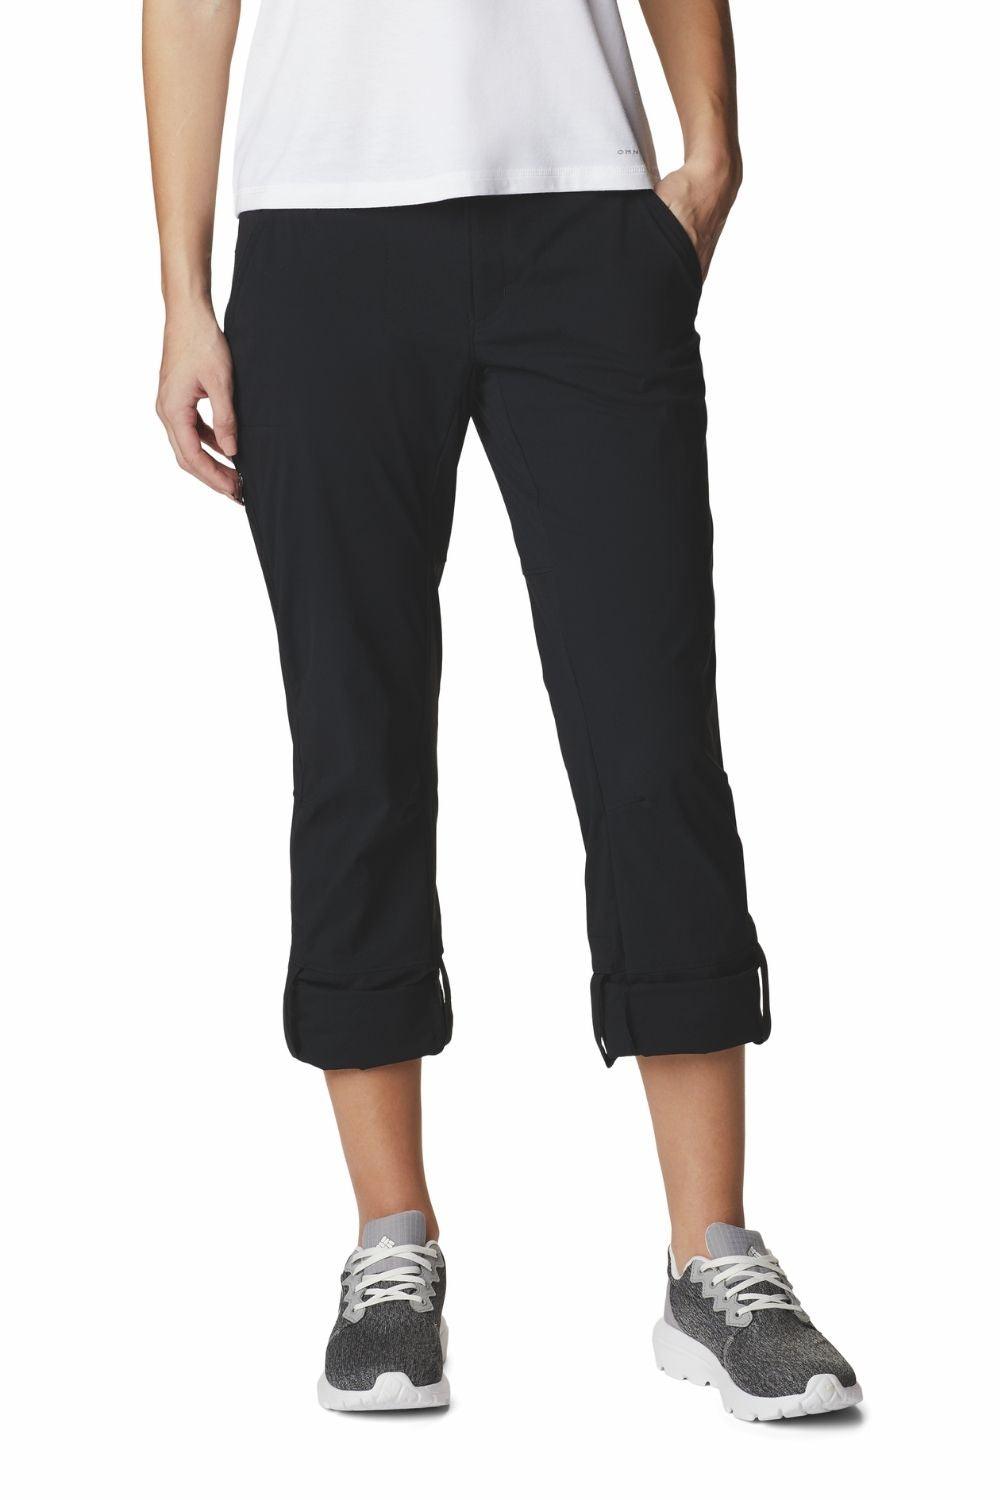 Women's UV Pant UPF 50+ for sun protection Columbia Saturday Trail